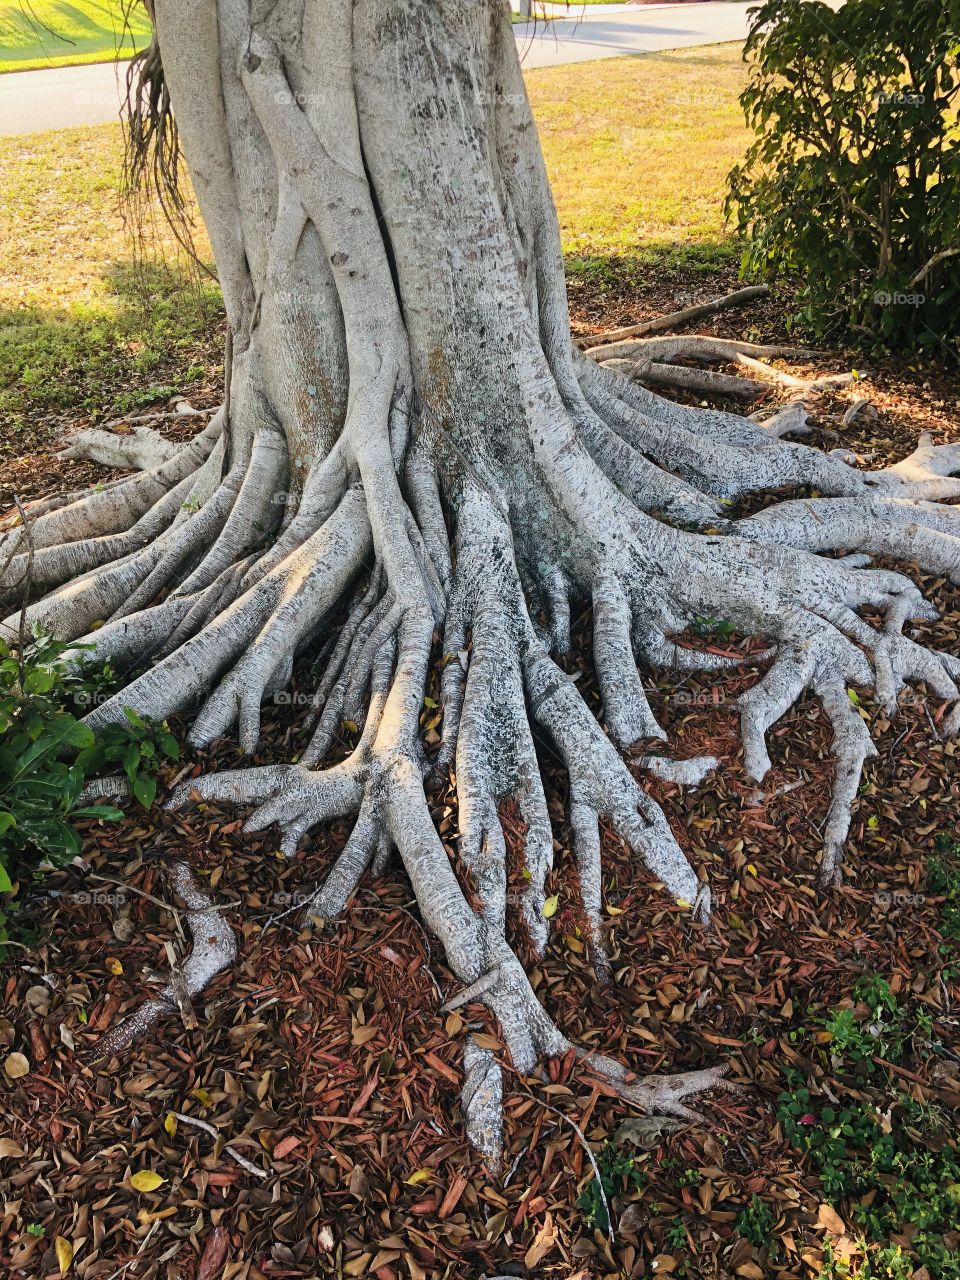 This well-established tree is living its best life in SW Florida.